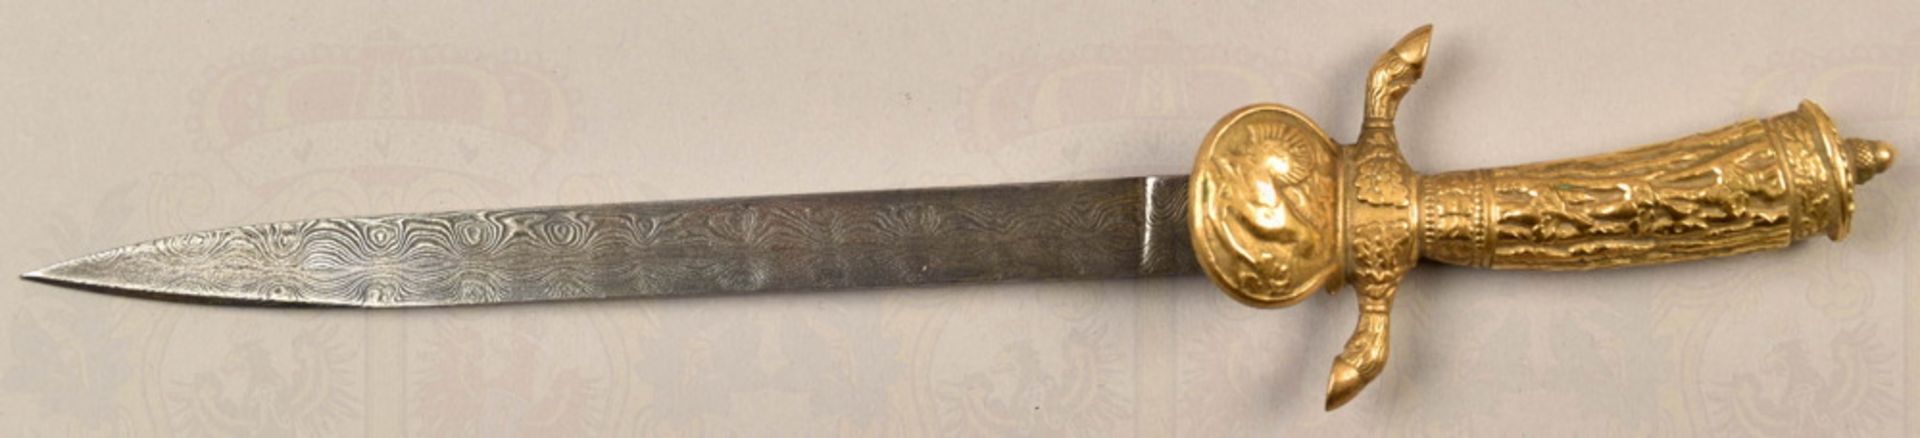 Miniature hunting knife with damask blade - Image 2 of 6